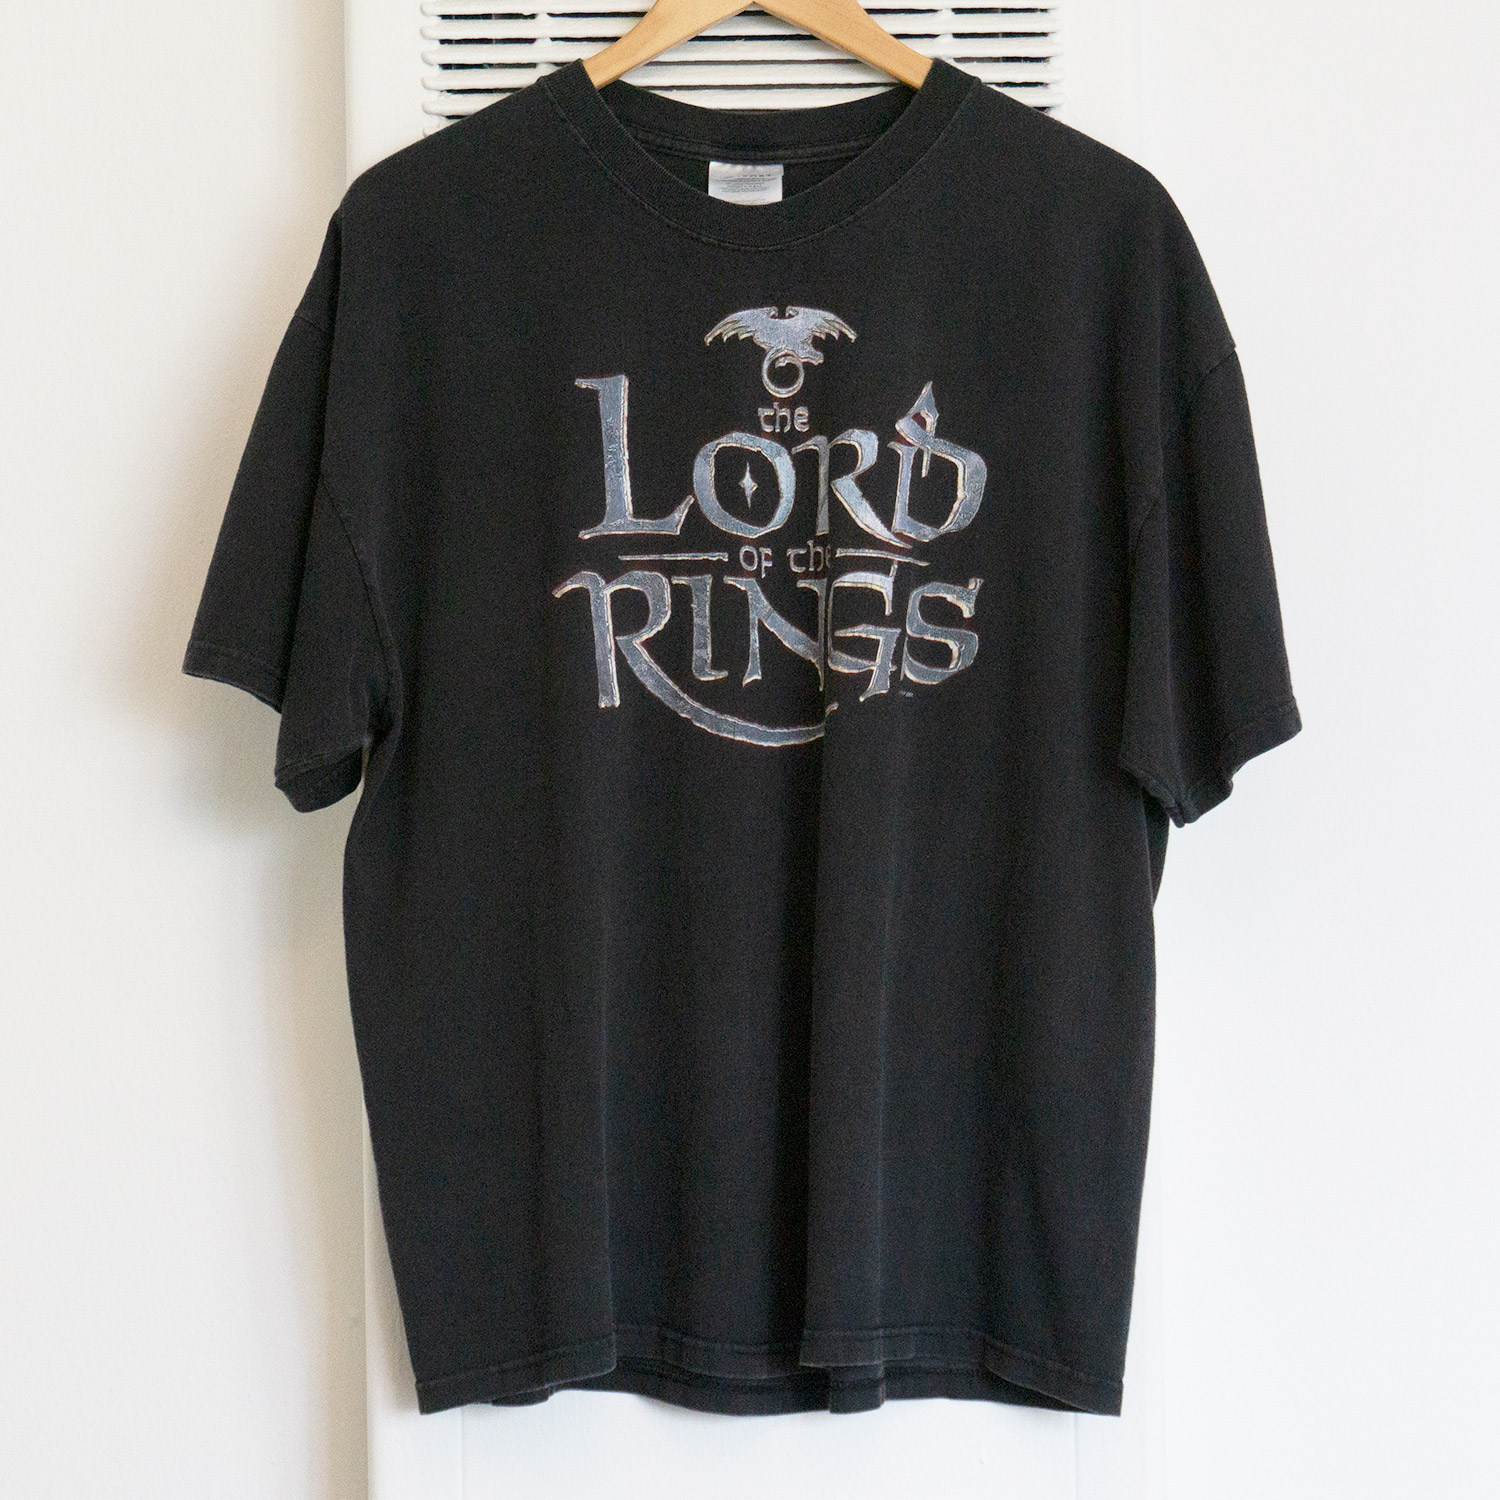 Vintage Lord of the Rings: The Fellowship of the Ring Faded Movie T-shirt, Front